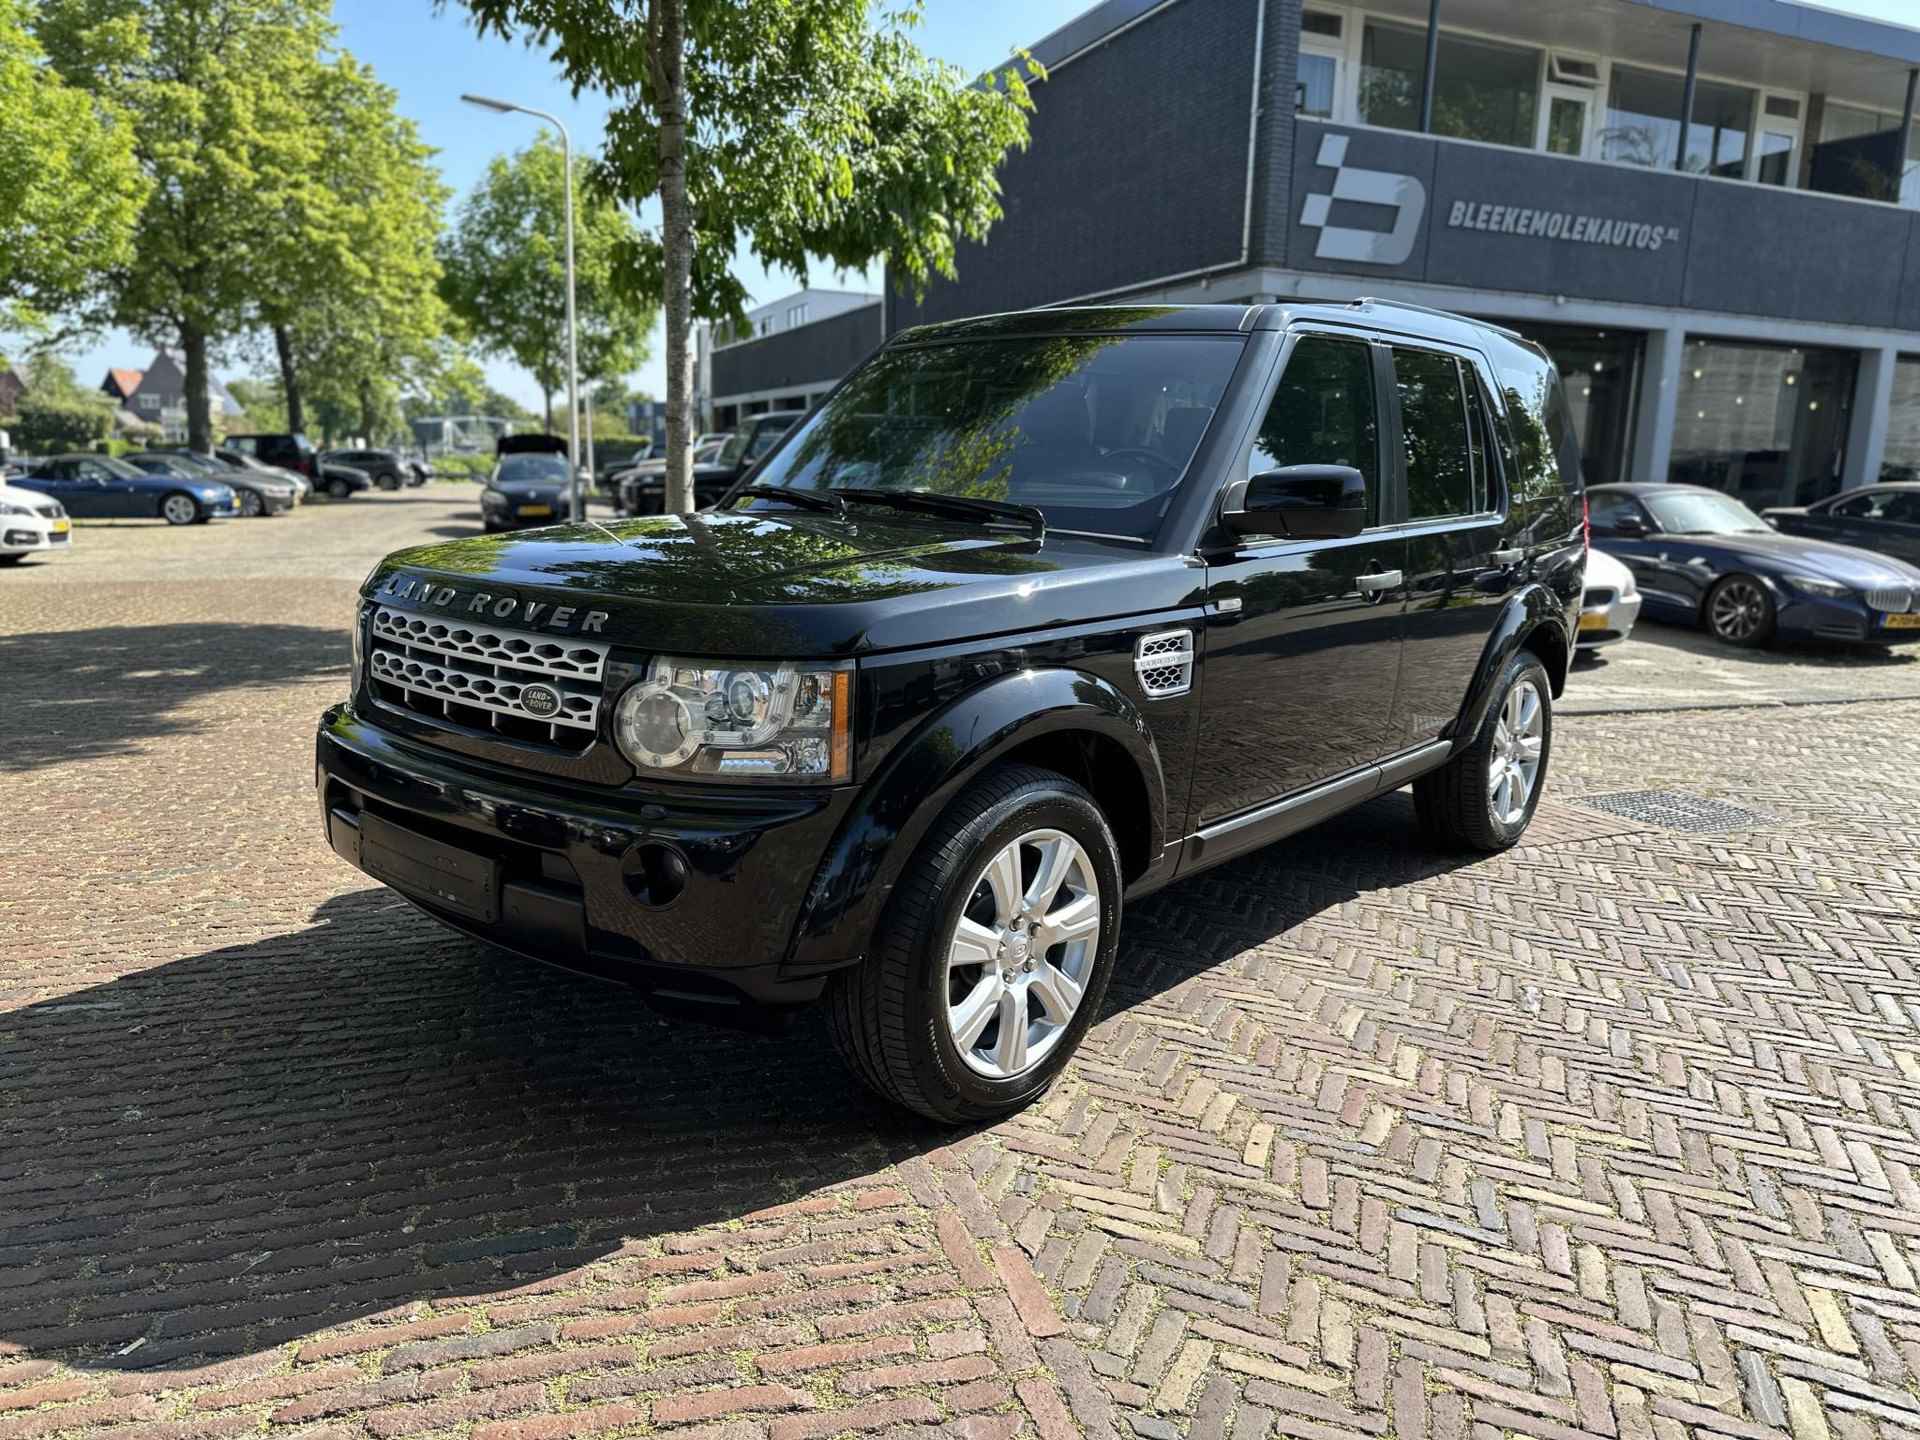 Land Rover Discovery 5.0 V8 HSE 5.0 Hse - 6/16